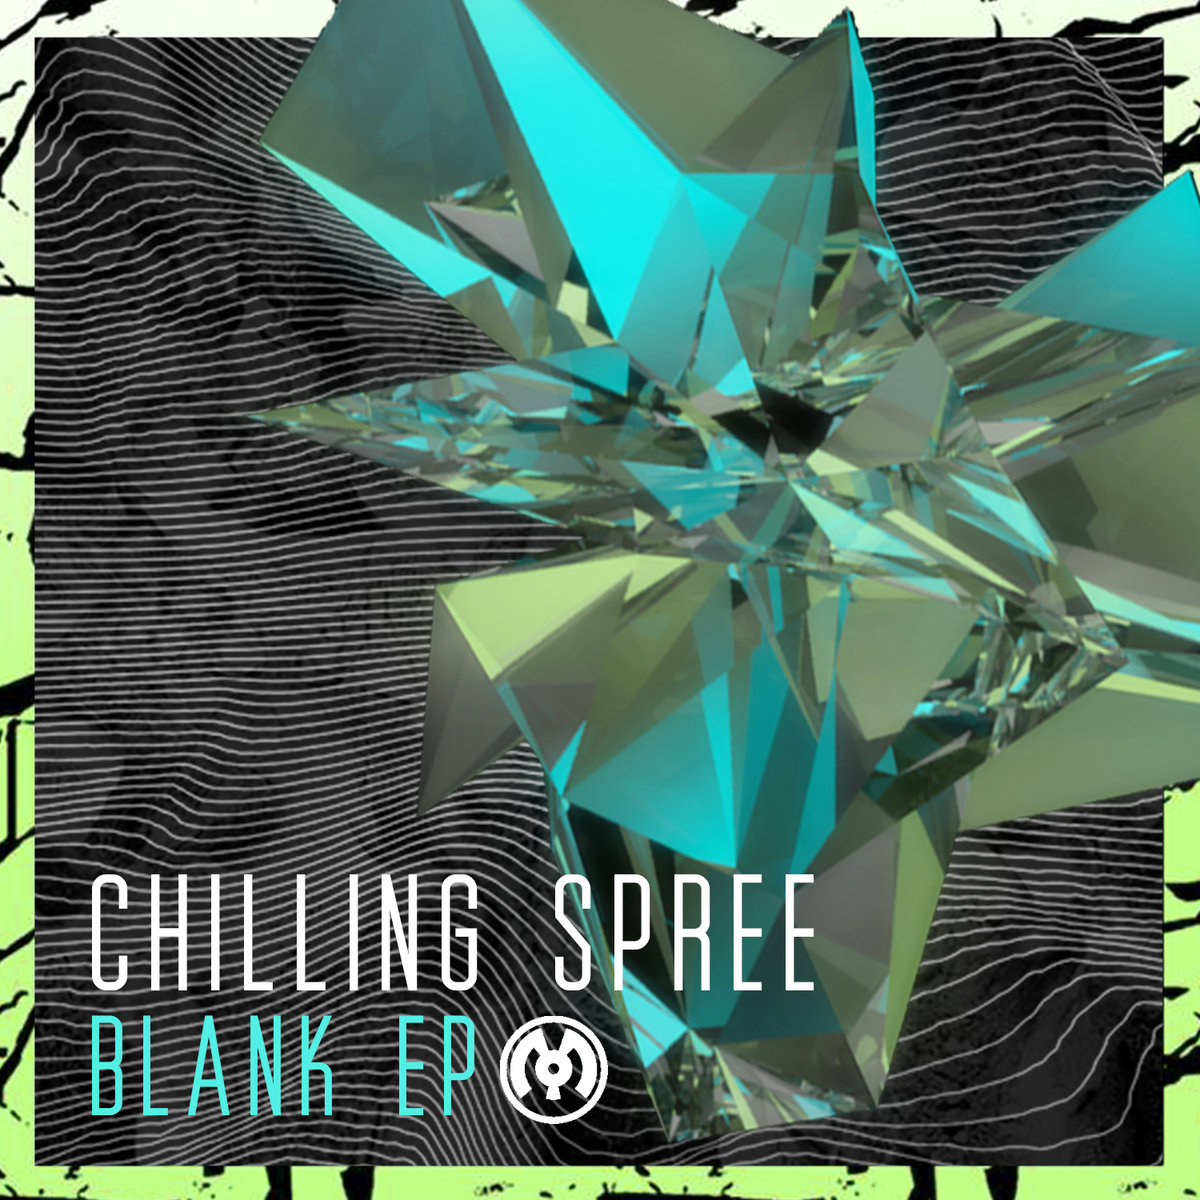 Chilling Spree - The Blank EP